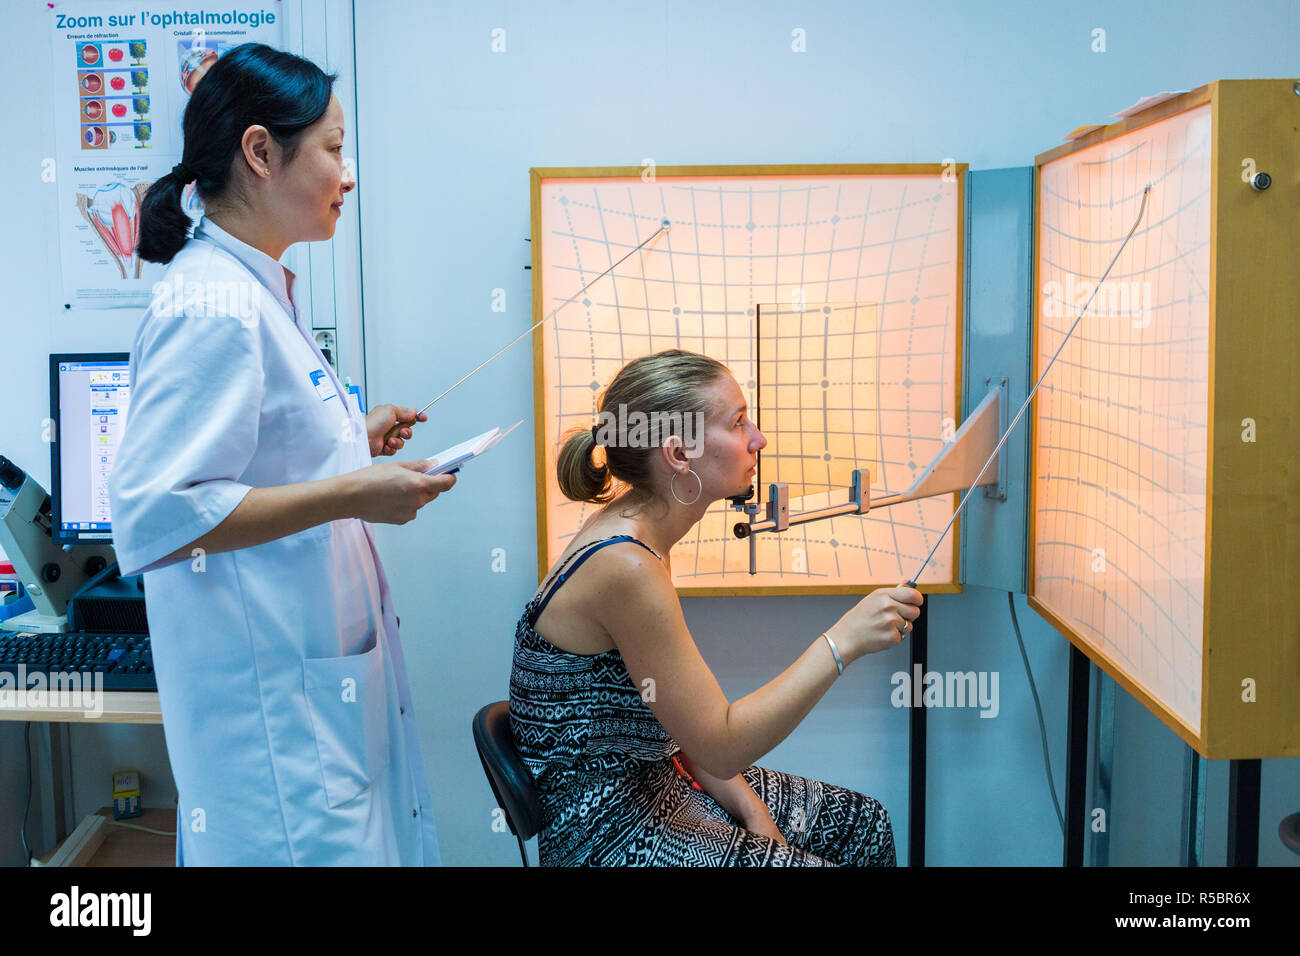 Woman undergoing orthoptic check-up with an orthoptist, France. Stock Photo